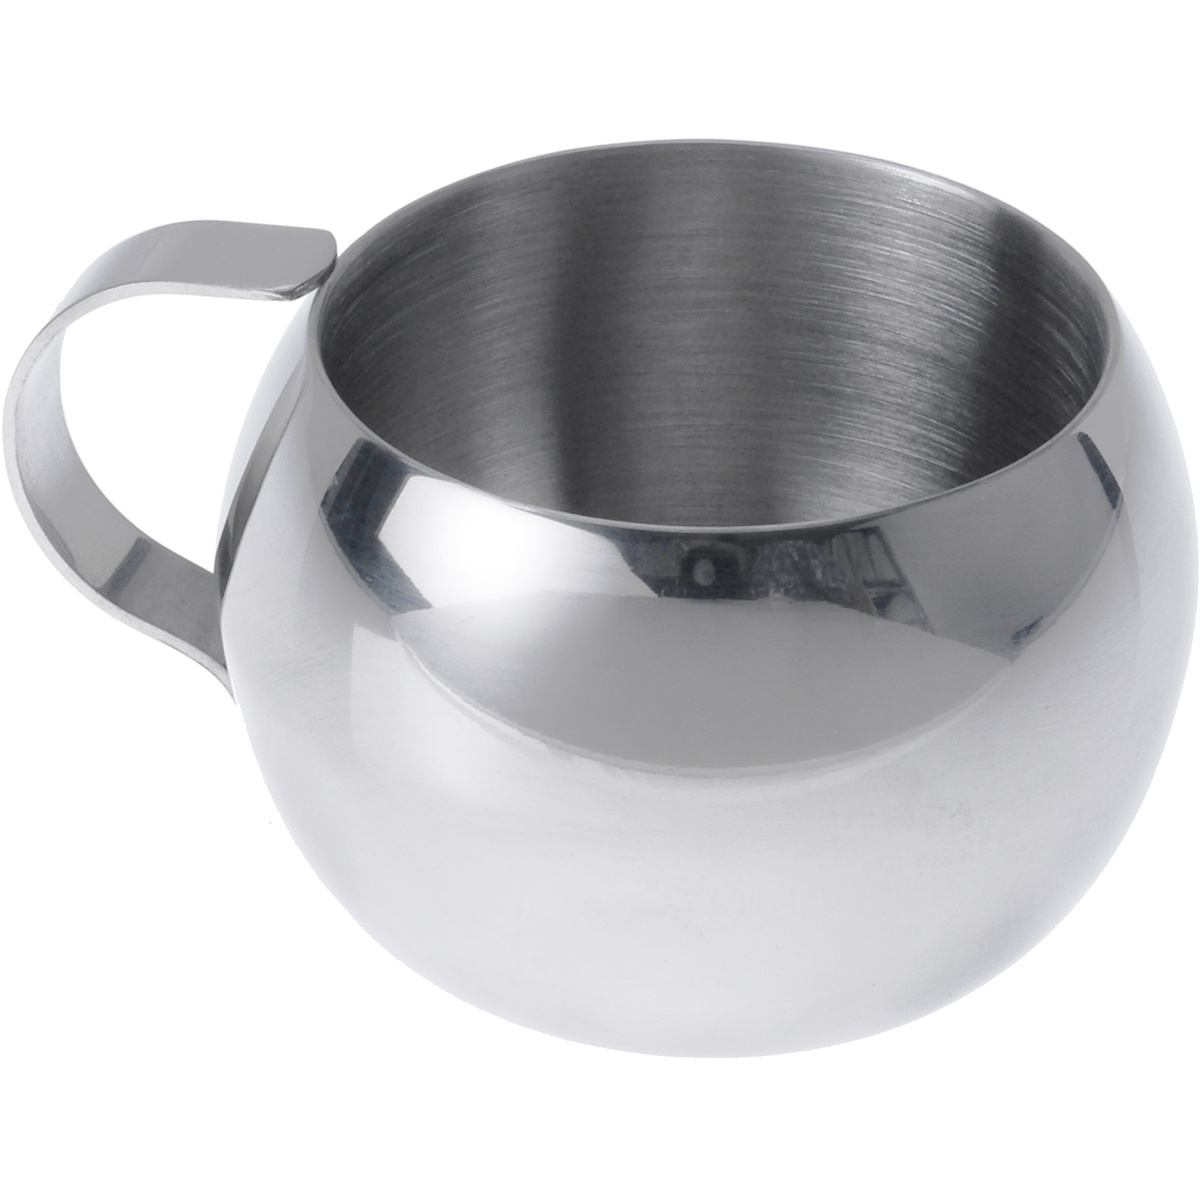 Image of GSI Glacier Stainless Double Walled Espresso Cup